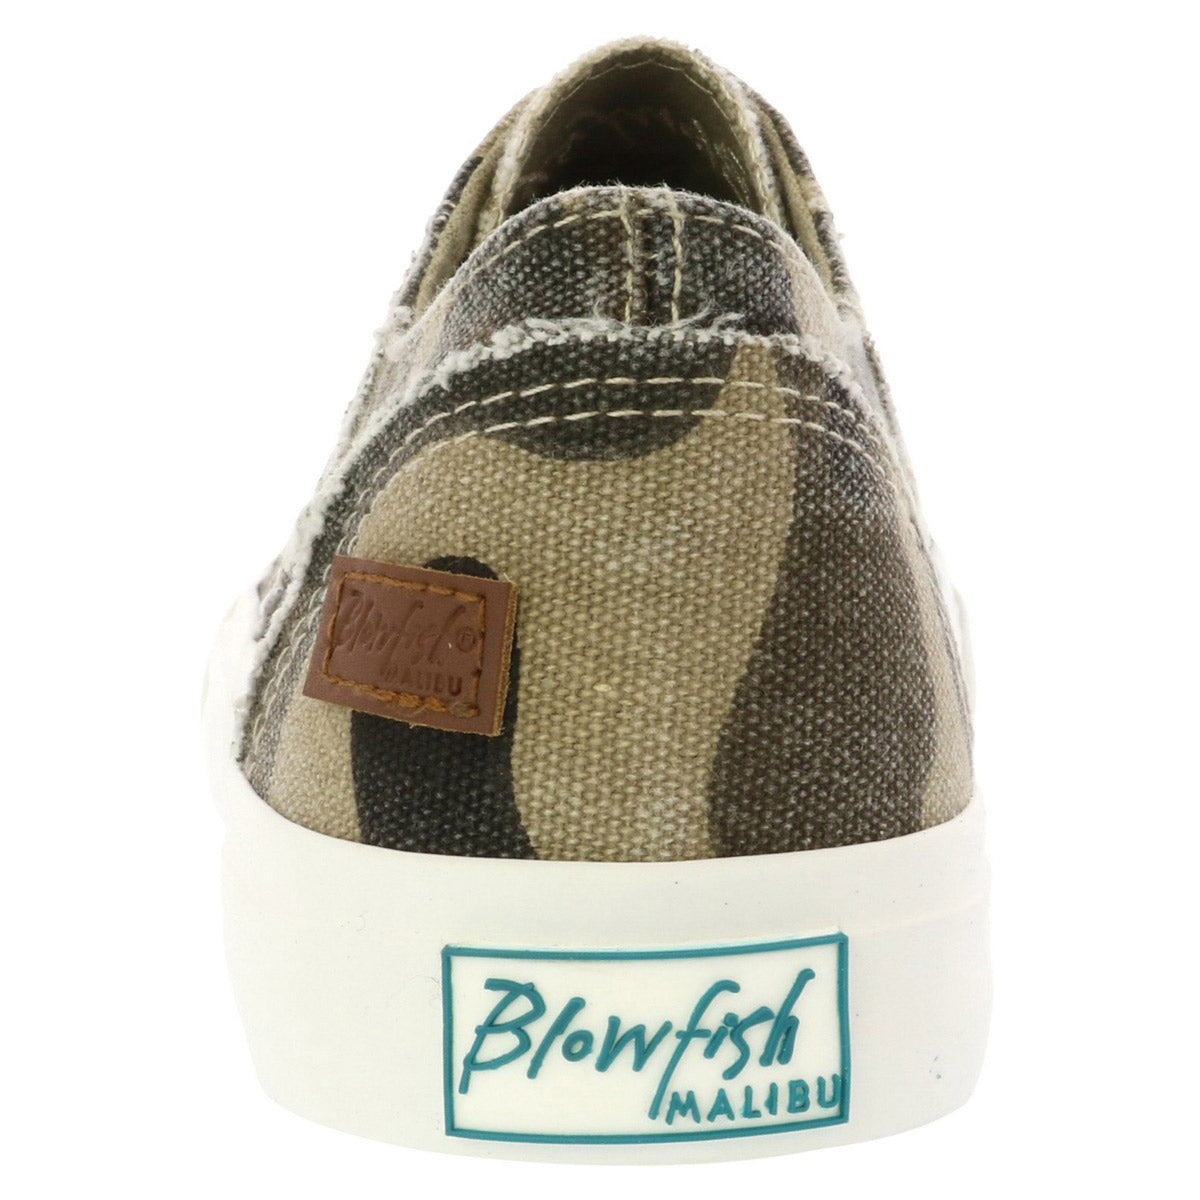 Rear view of a women&#39;s Blowfish canvas shoe with &quot;Blowfish&quot; branding on the heel.